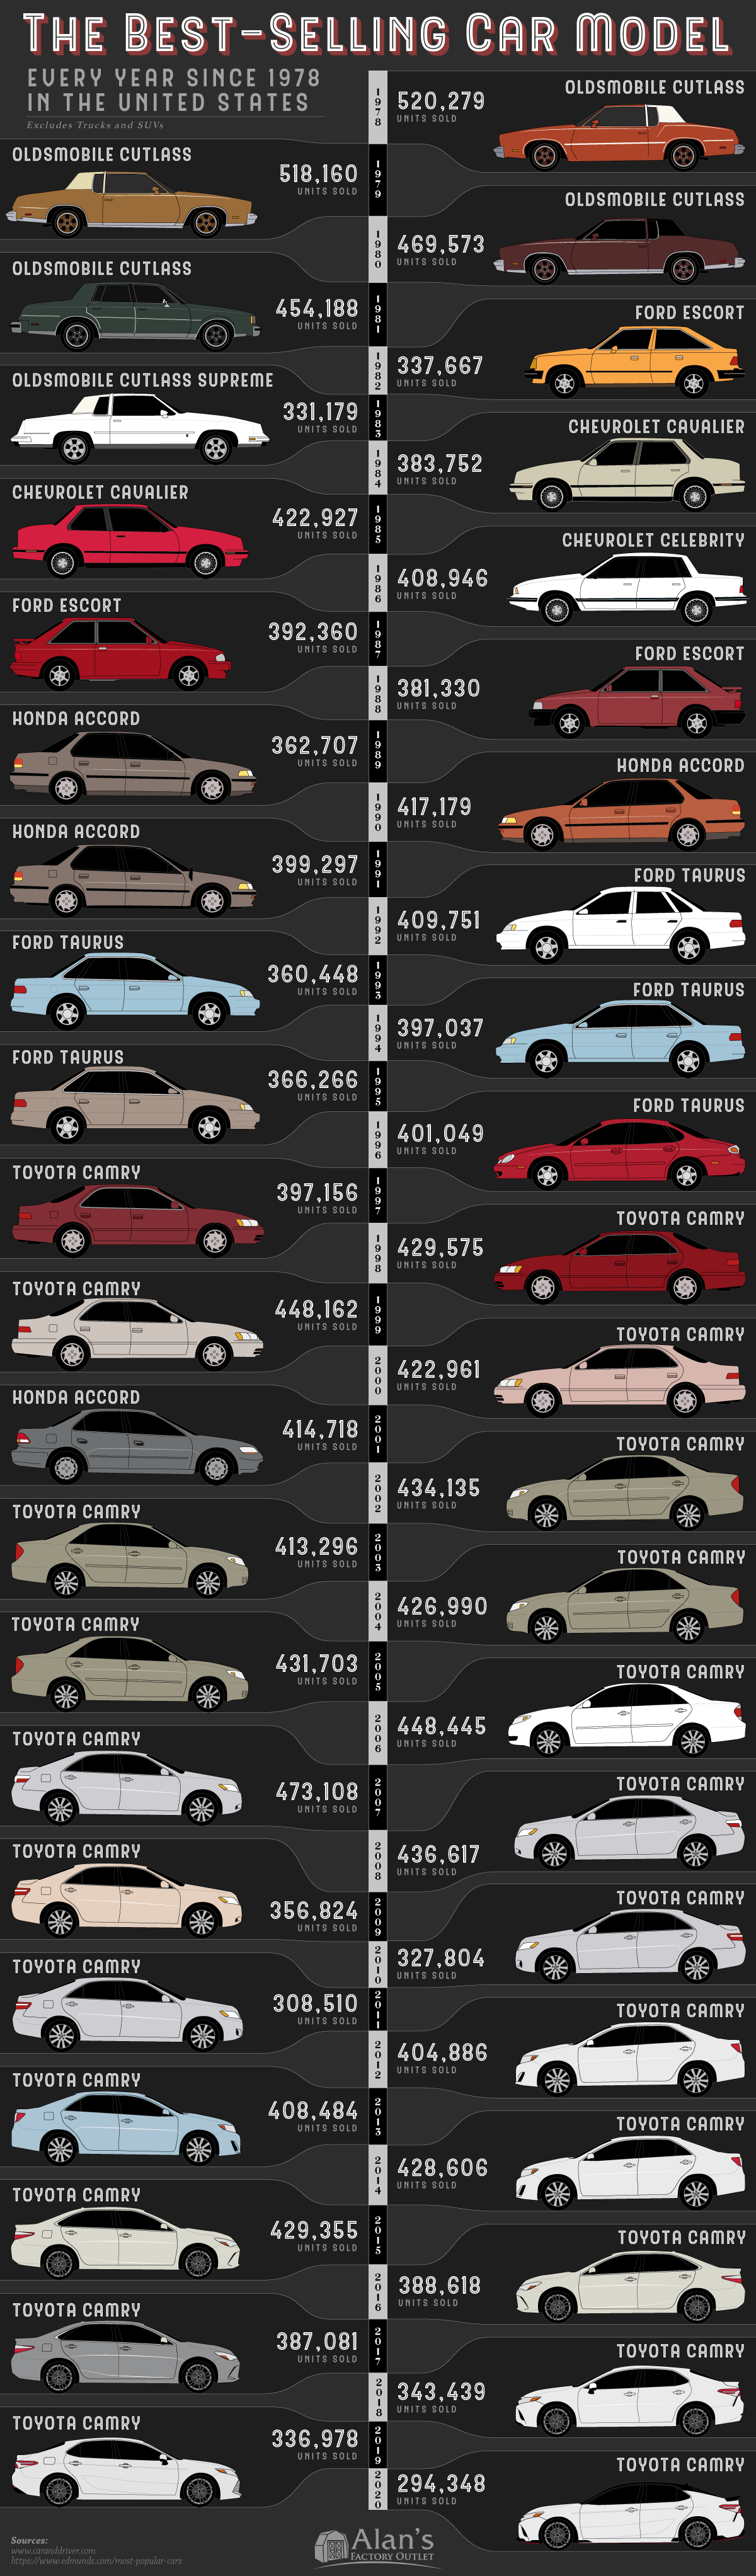 Image of the best-selling car in America since 1978